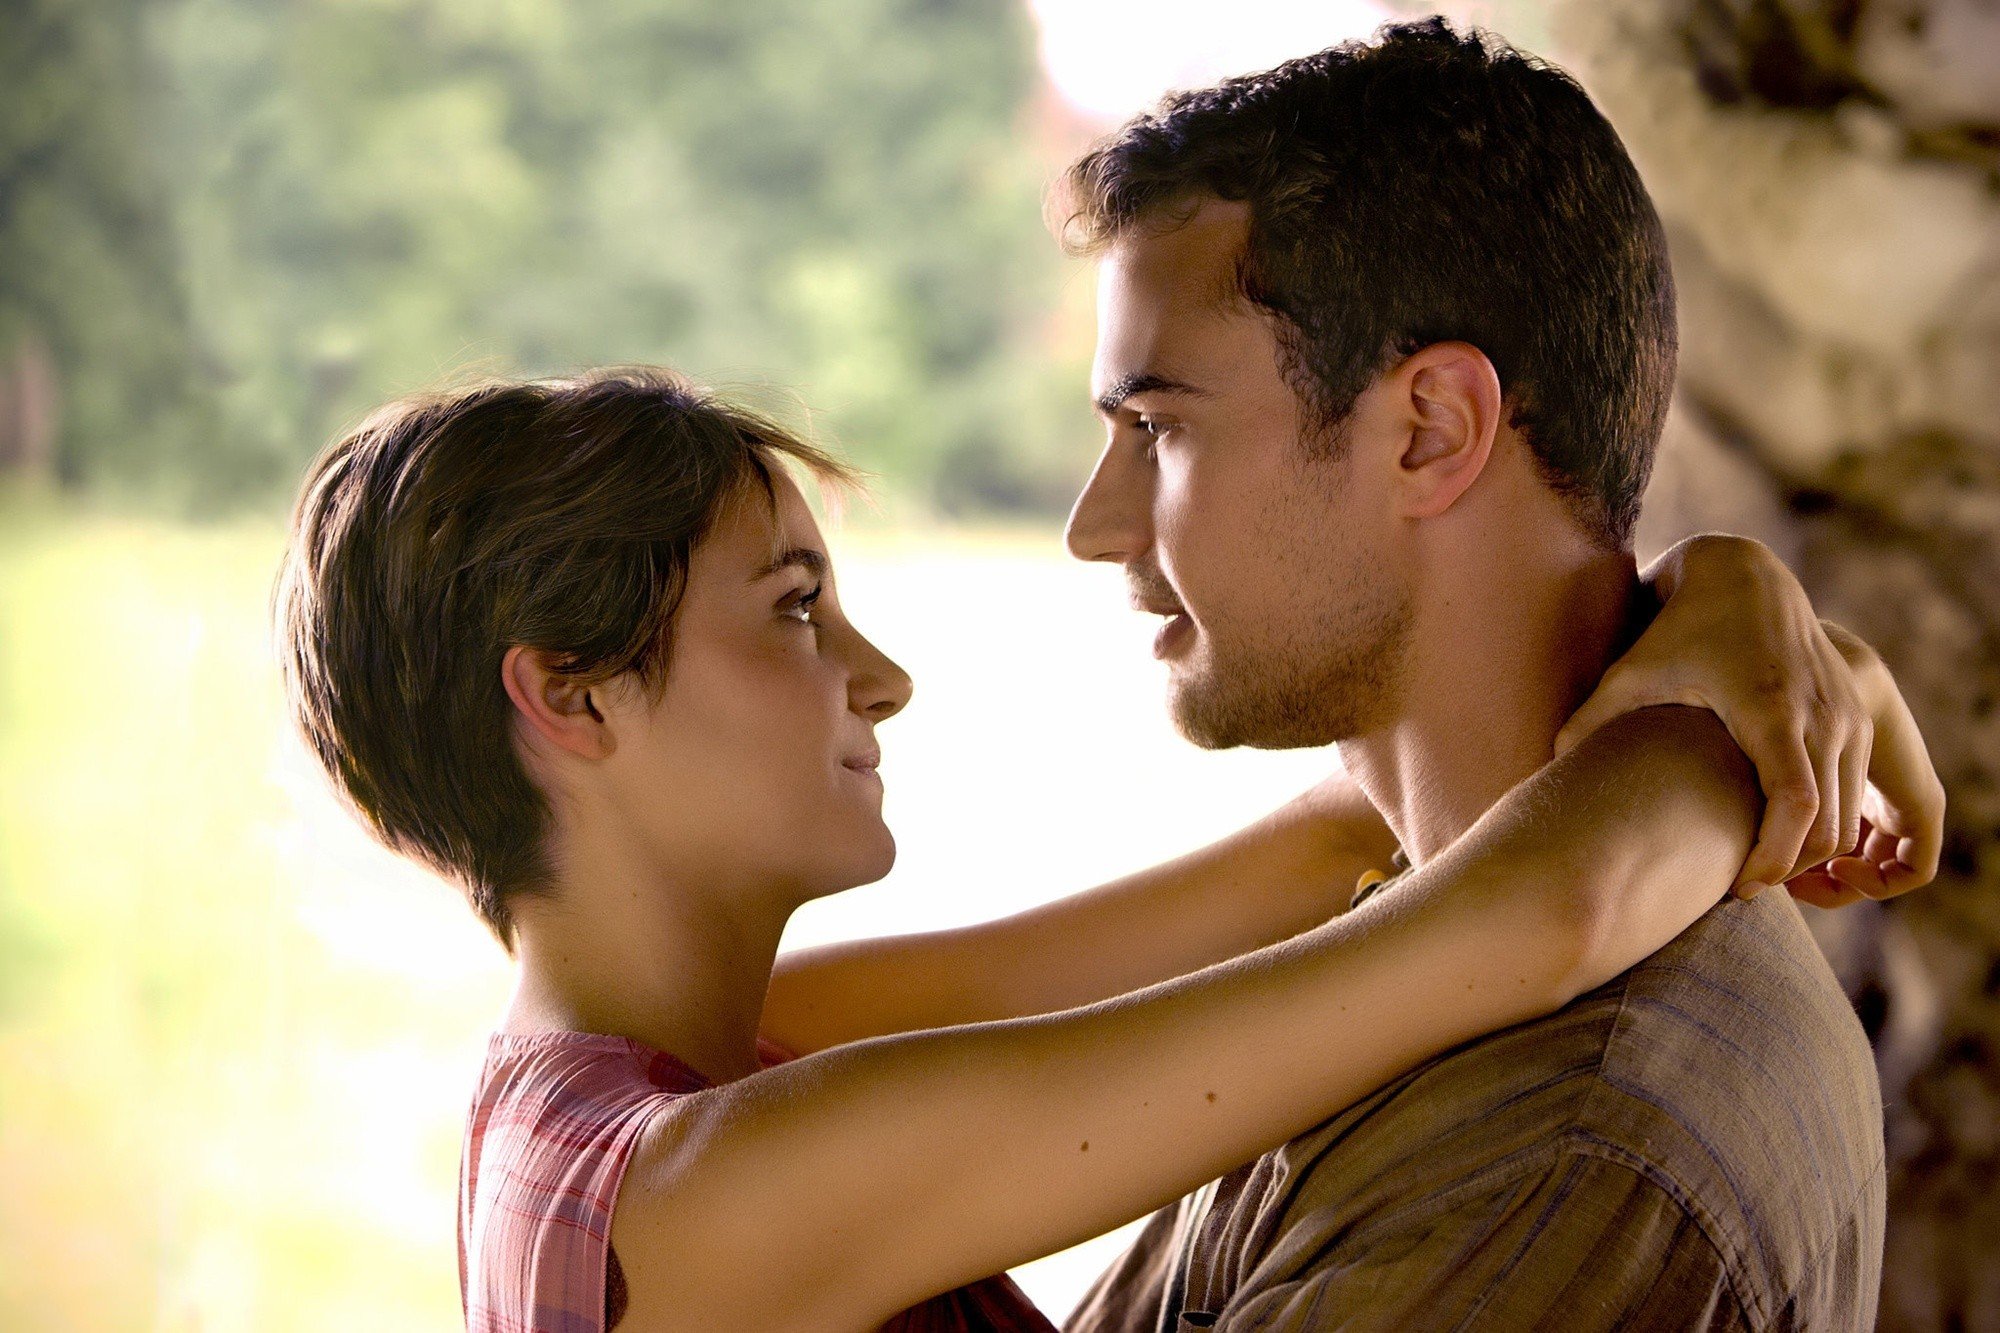 Shailene Woodley stars as Tris and Theo James stars as Four in Summit Entertainment's The Divergent Series: Insurgent (2015)